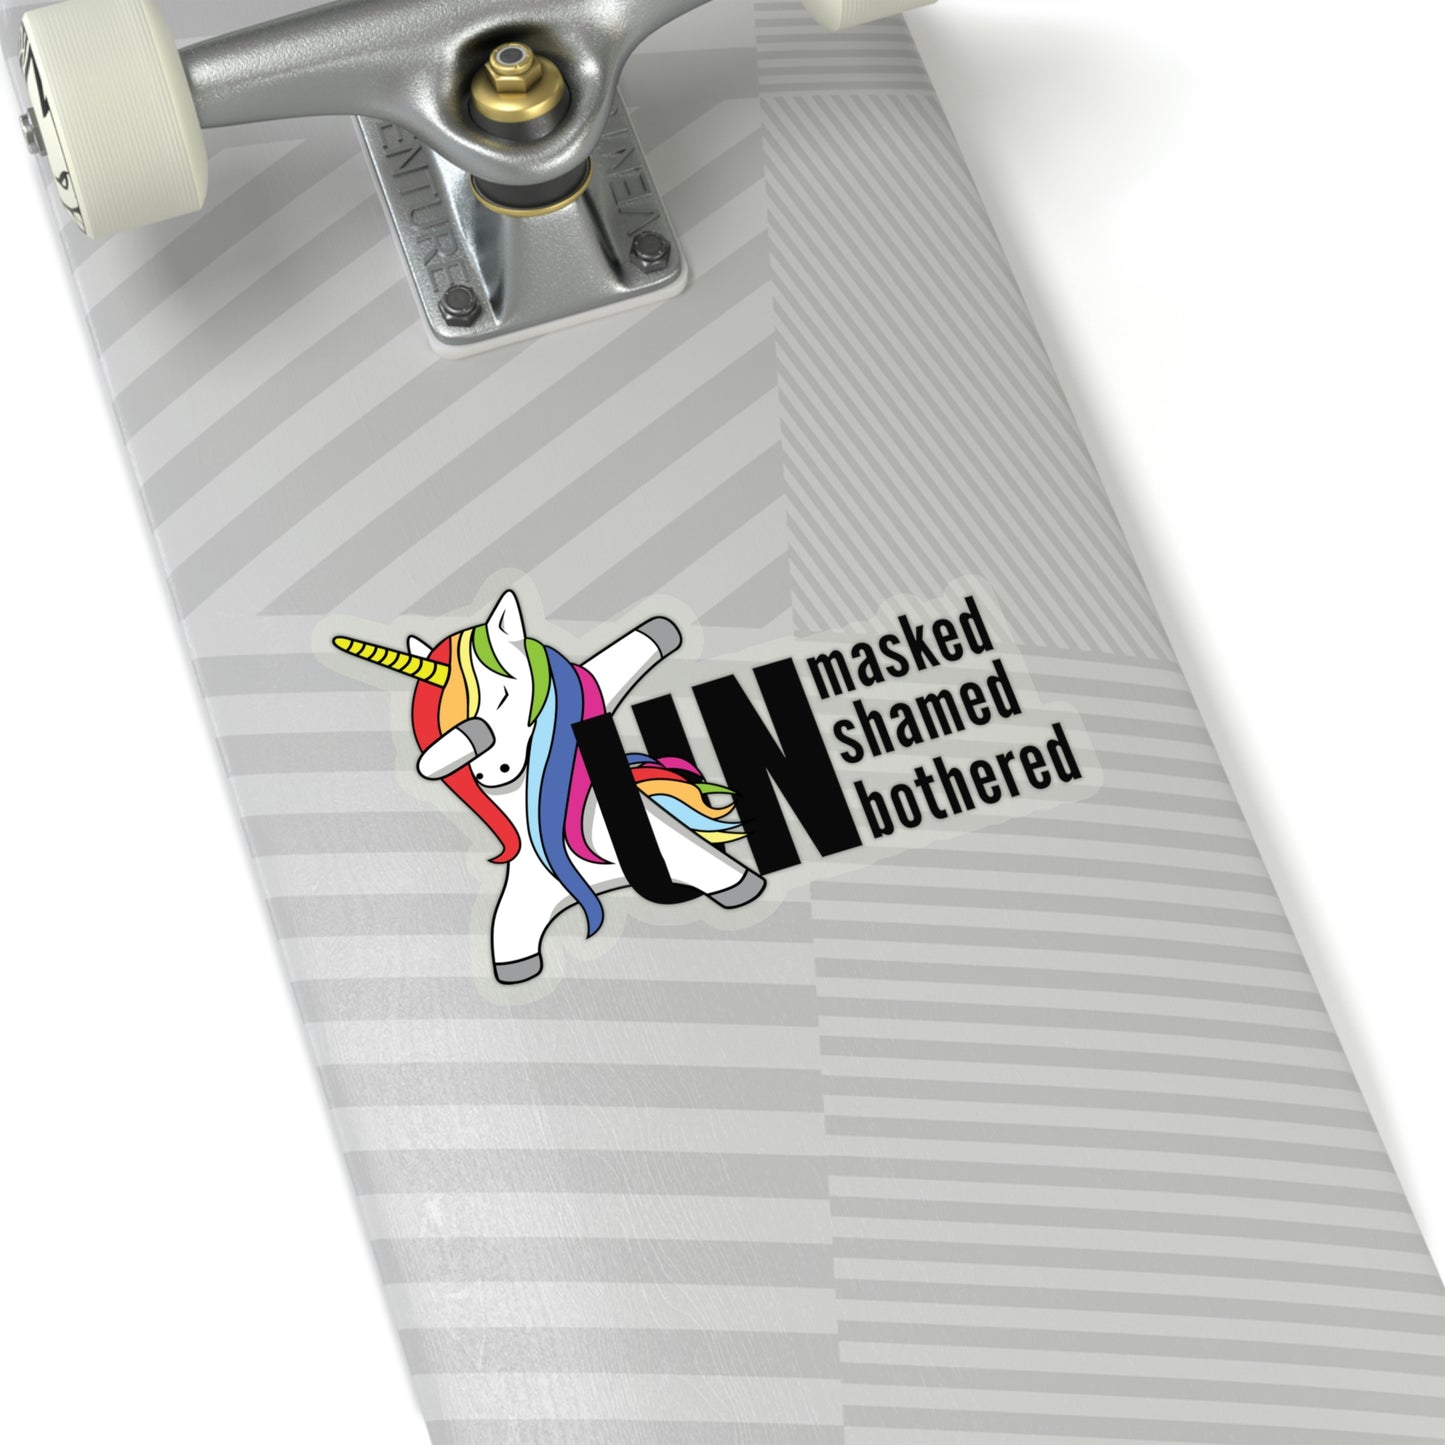 "Unmasked Unshamed Unbothered" Unicorn Kiss-Cut Stickers